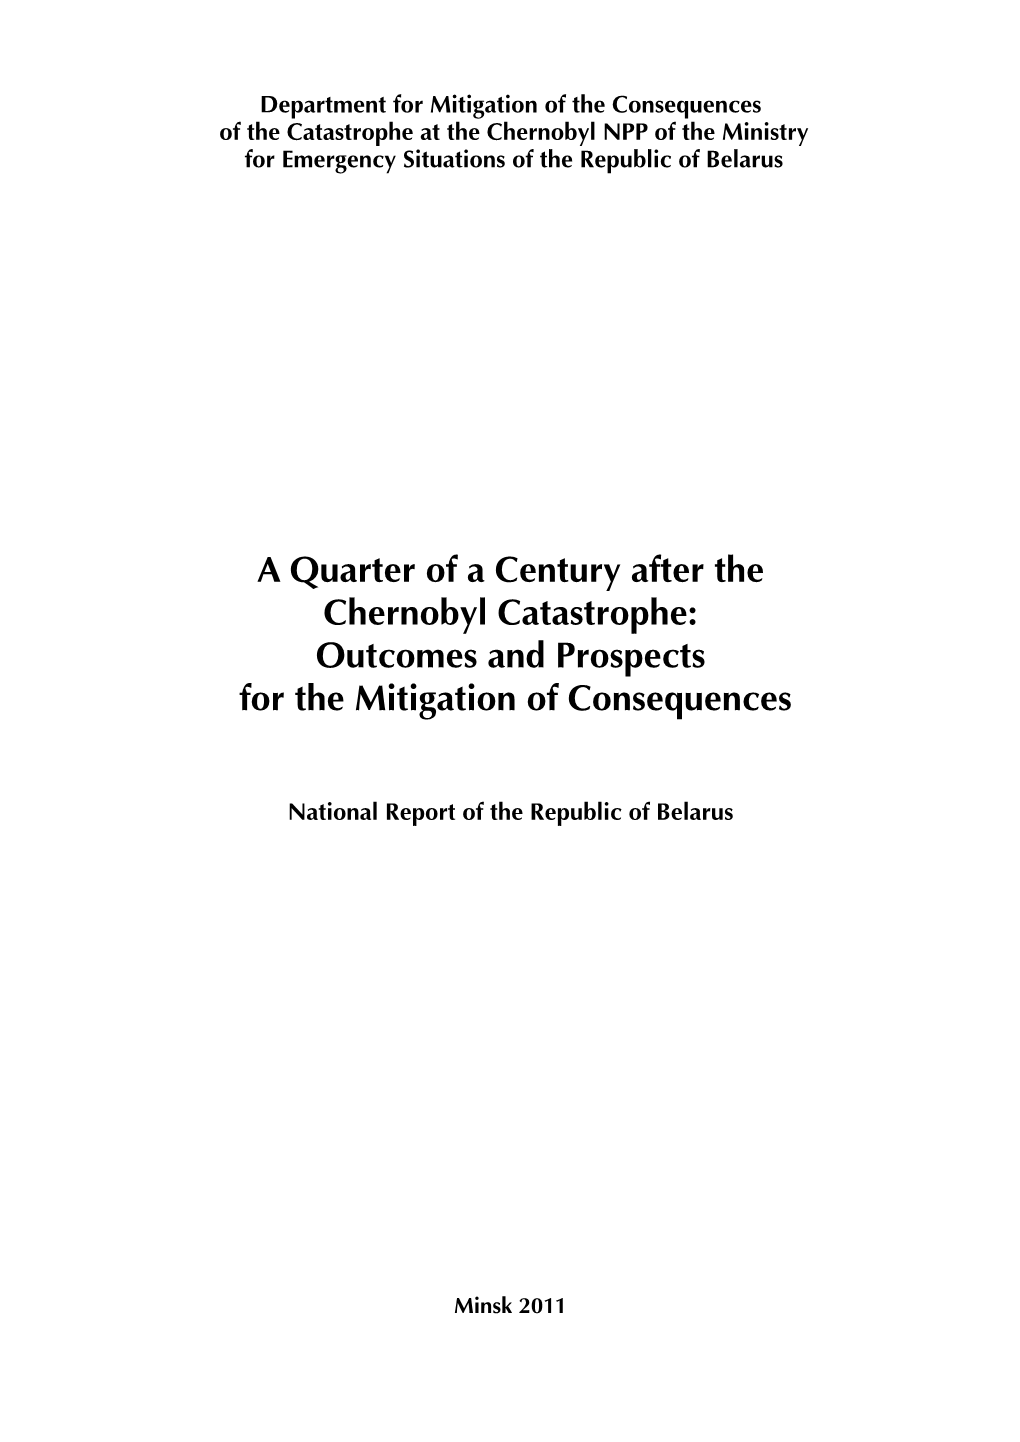 A Quarter of a Century After the Chernobyl Catastrophe: Outcomes and Prospects for the Mitigation of Consequences